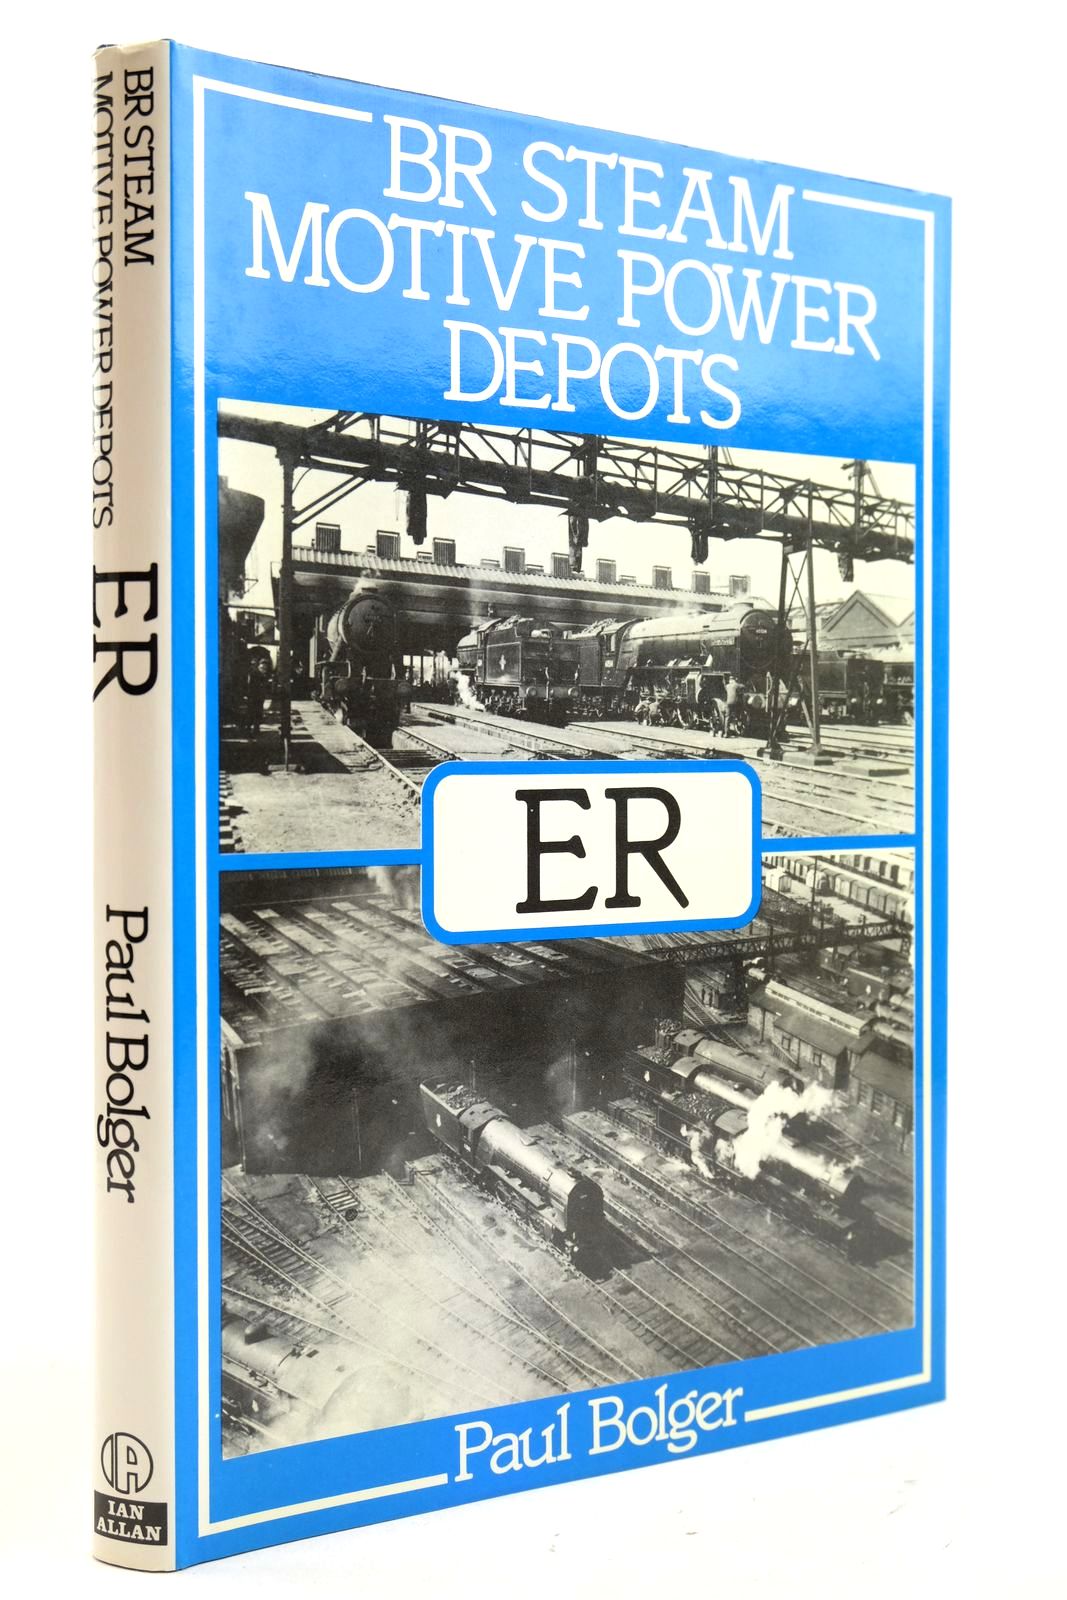 Photo of BR STEAM MOTIVE POWER DEPOTS ER written by Bolger, Paul published by Ian Allan (STOCK CODE: 2133028)  for sale by Stella & Rose's Books